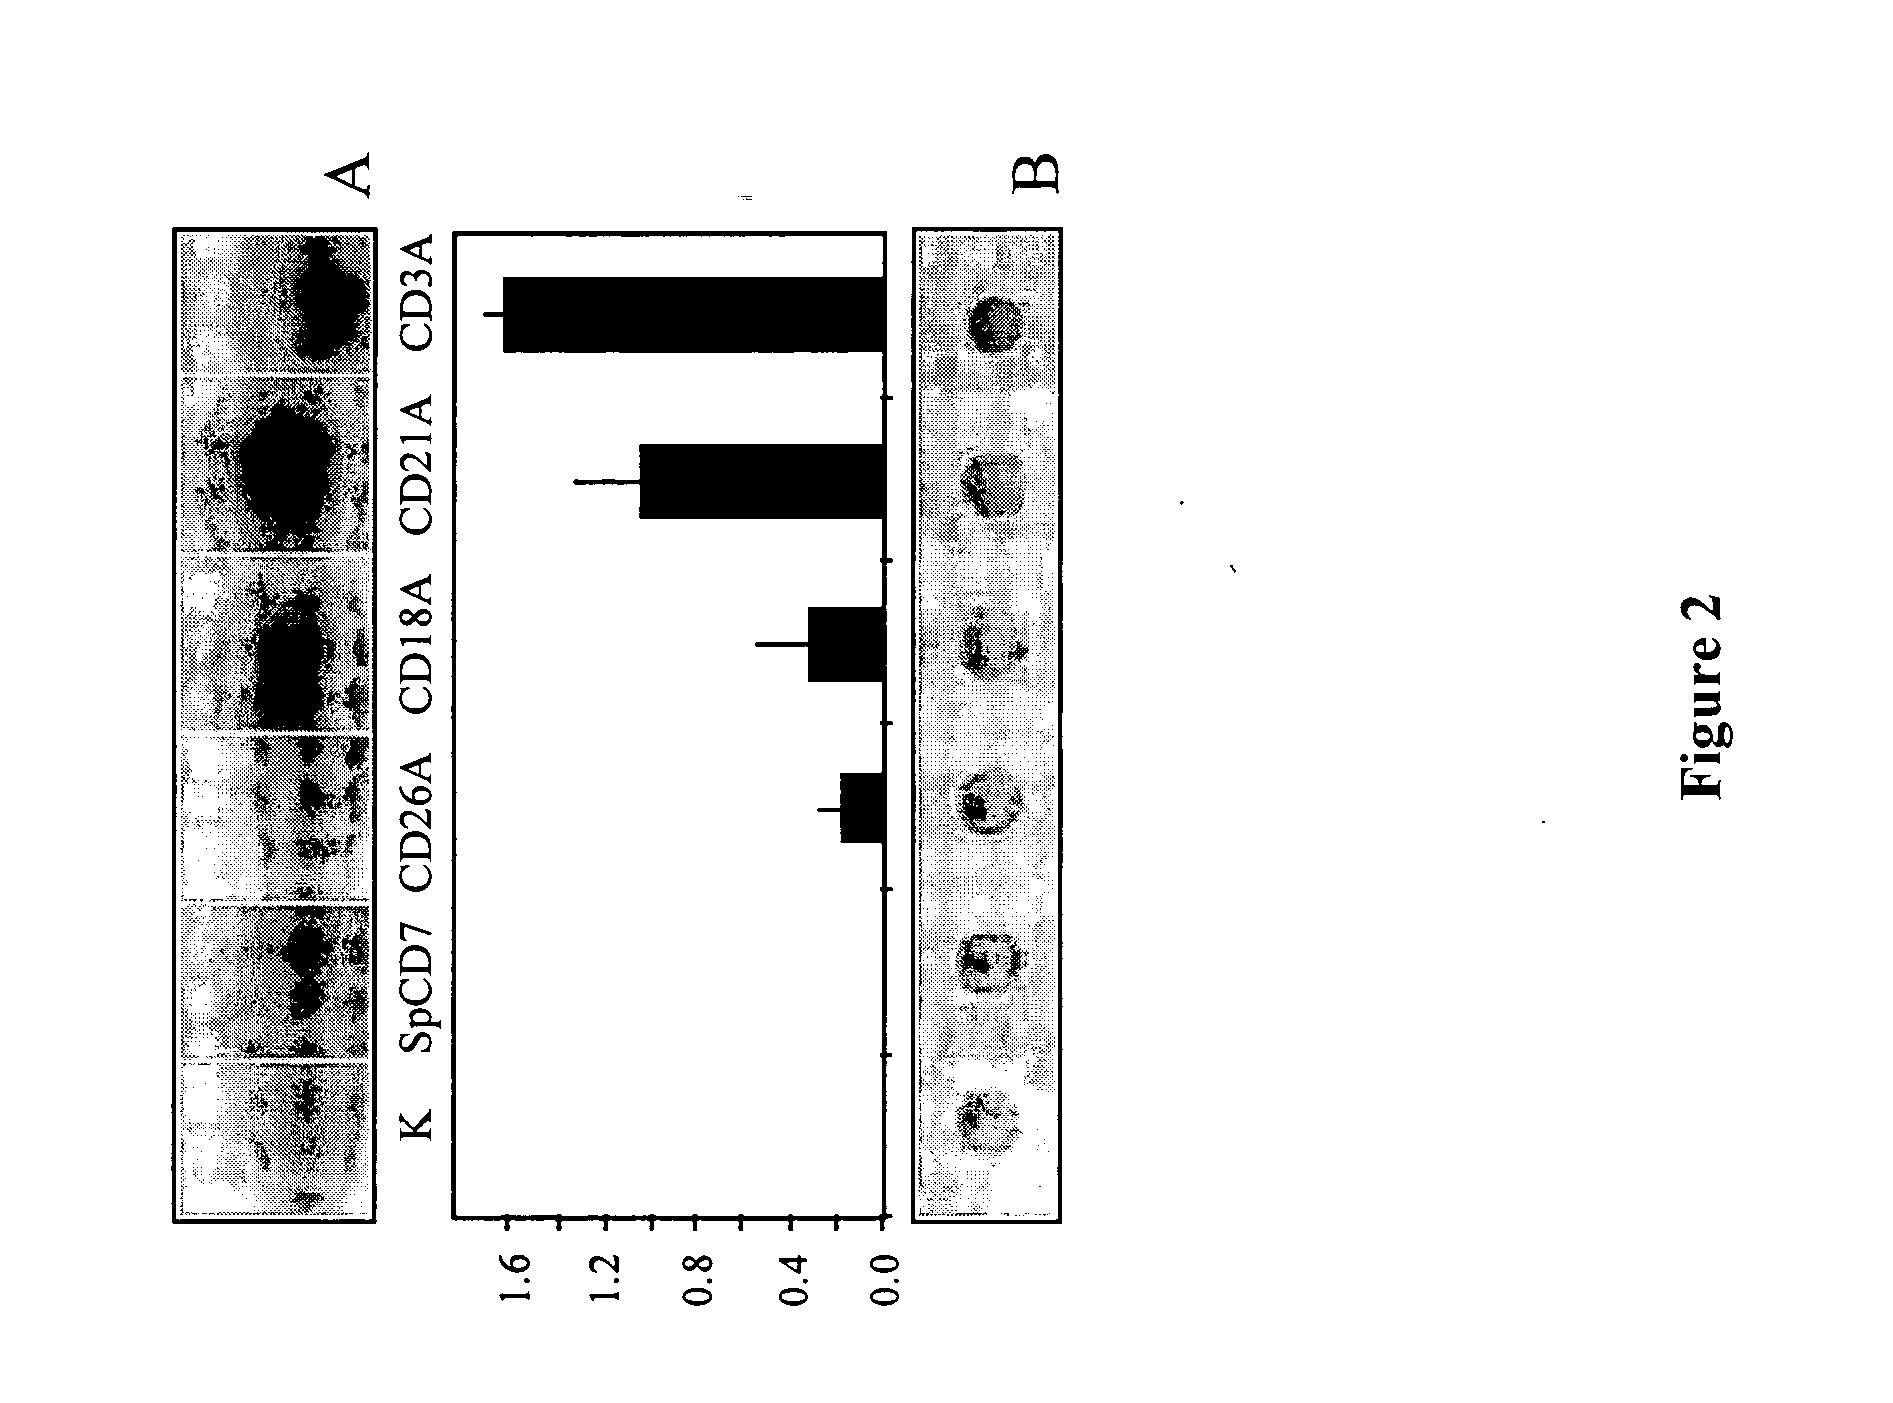 Method for increasing protein content in plant cells